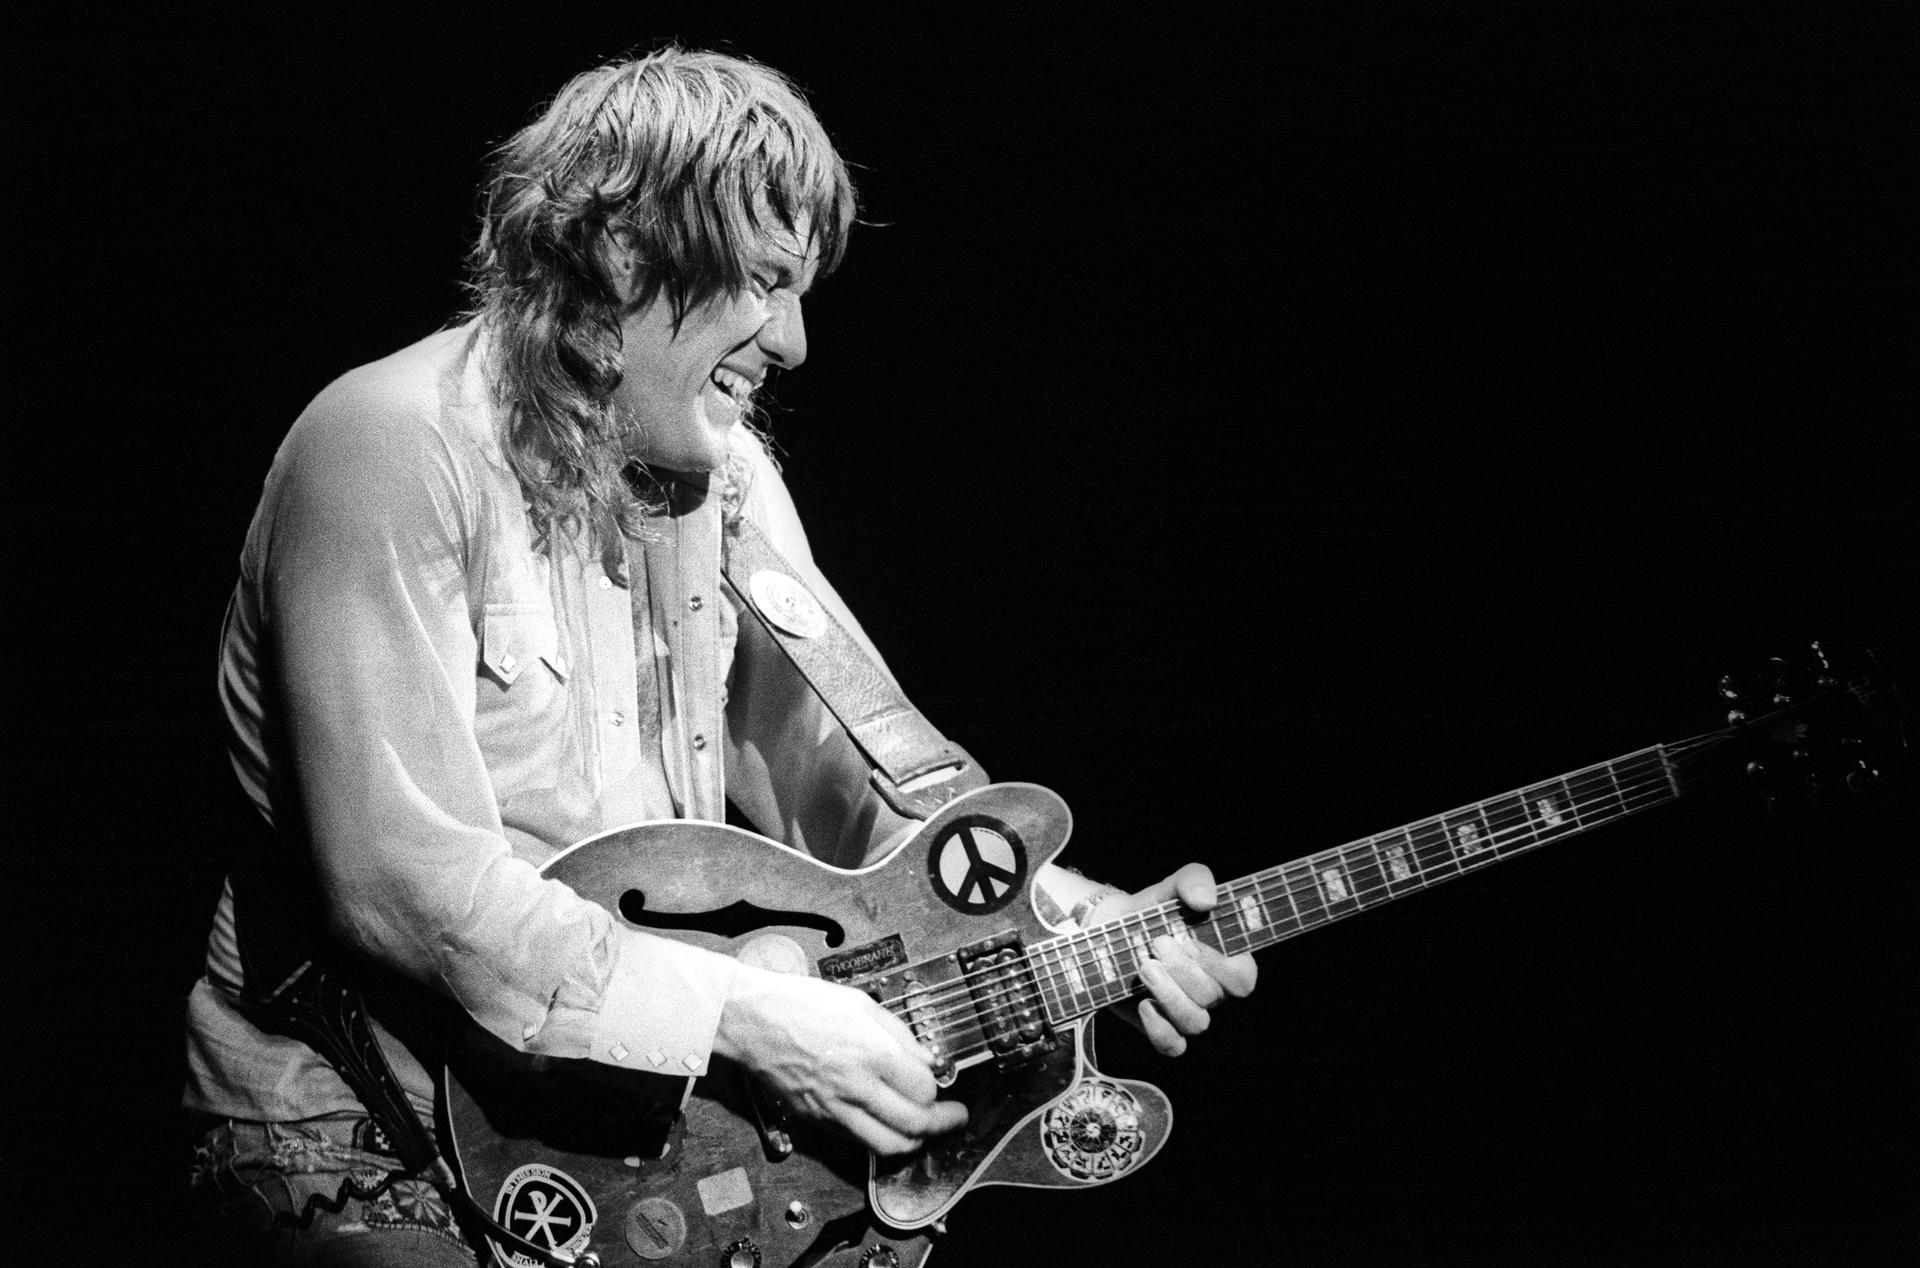 Alvin Lee performs with Ten Years After at Winterland in May 1978 in San Francisco, California.